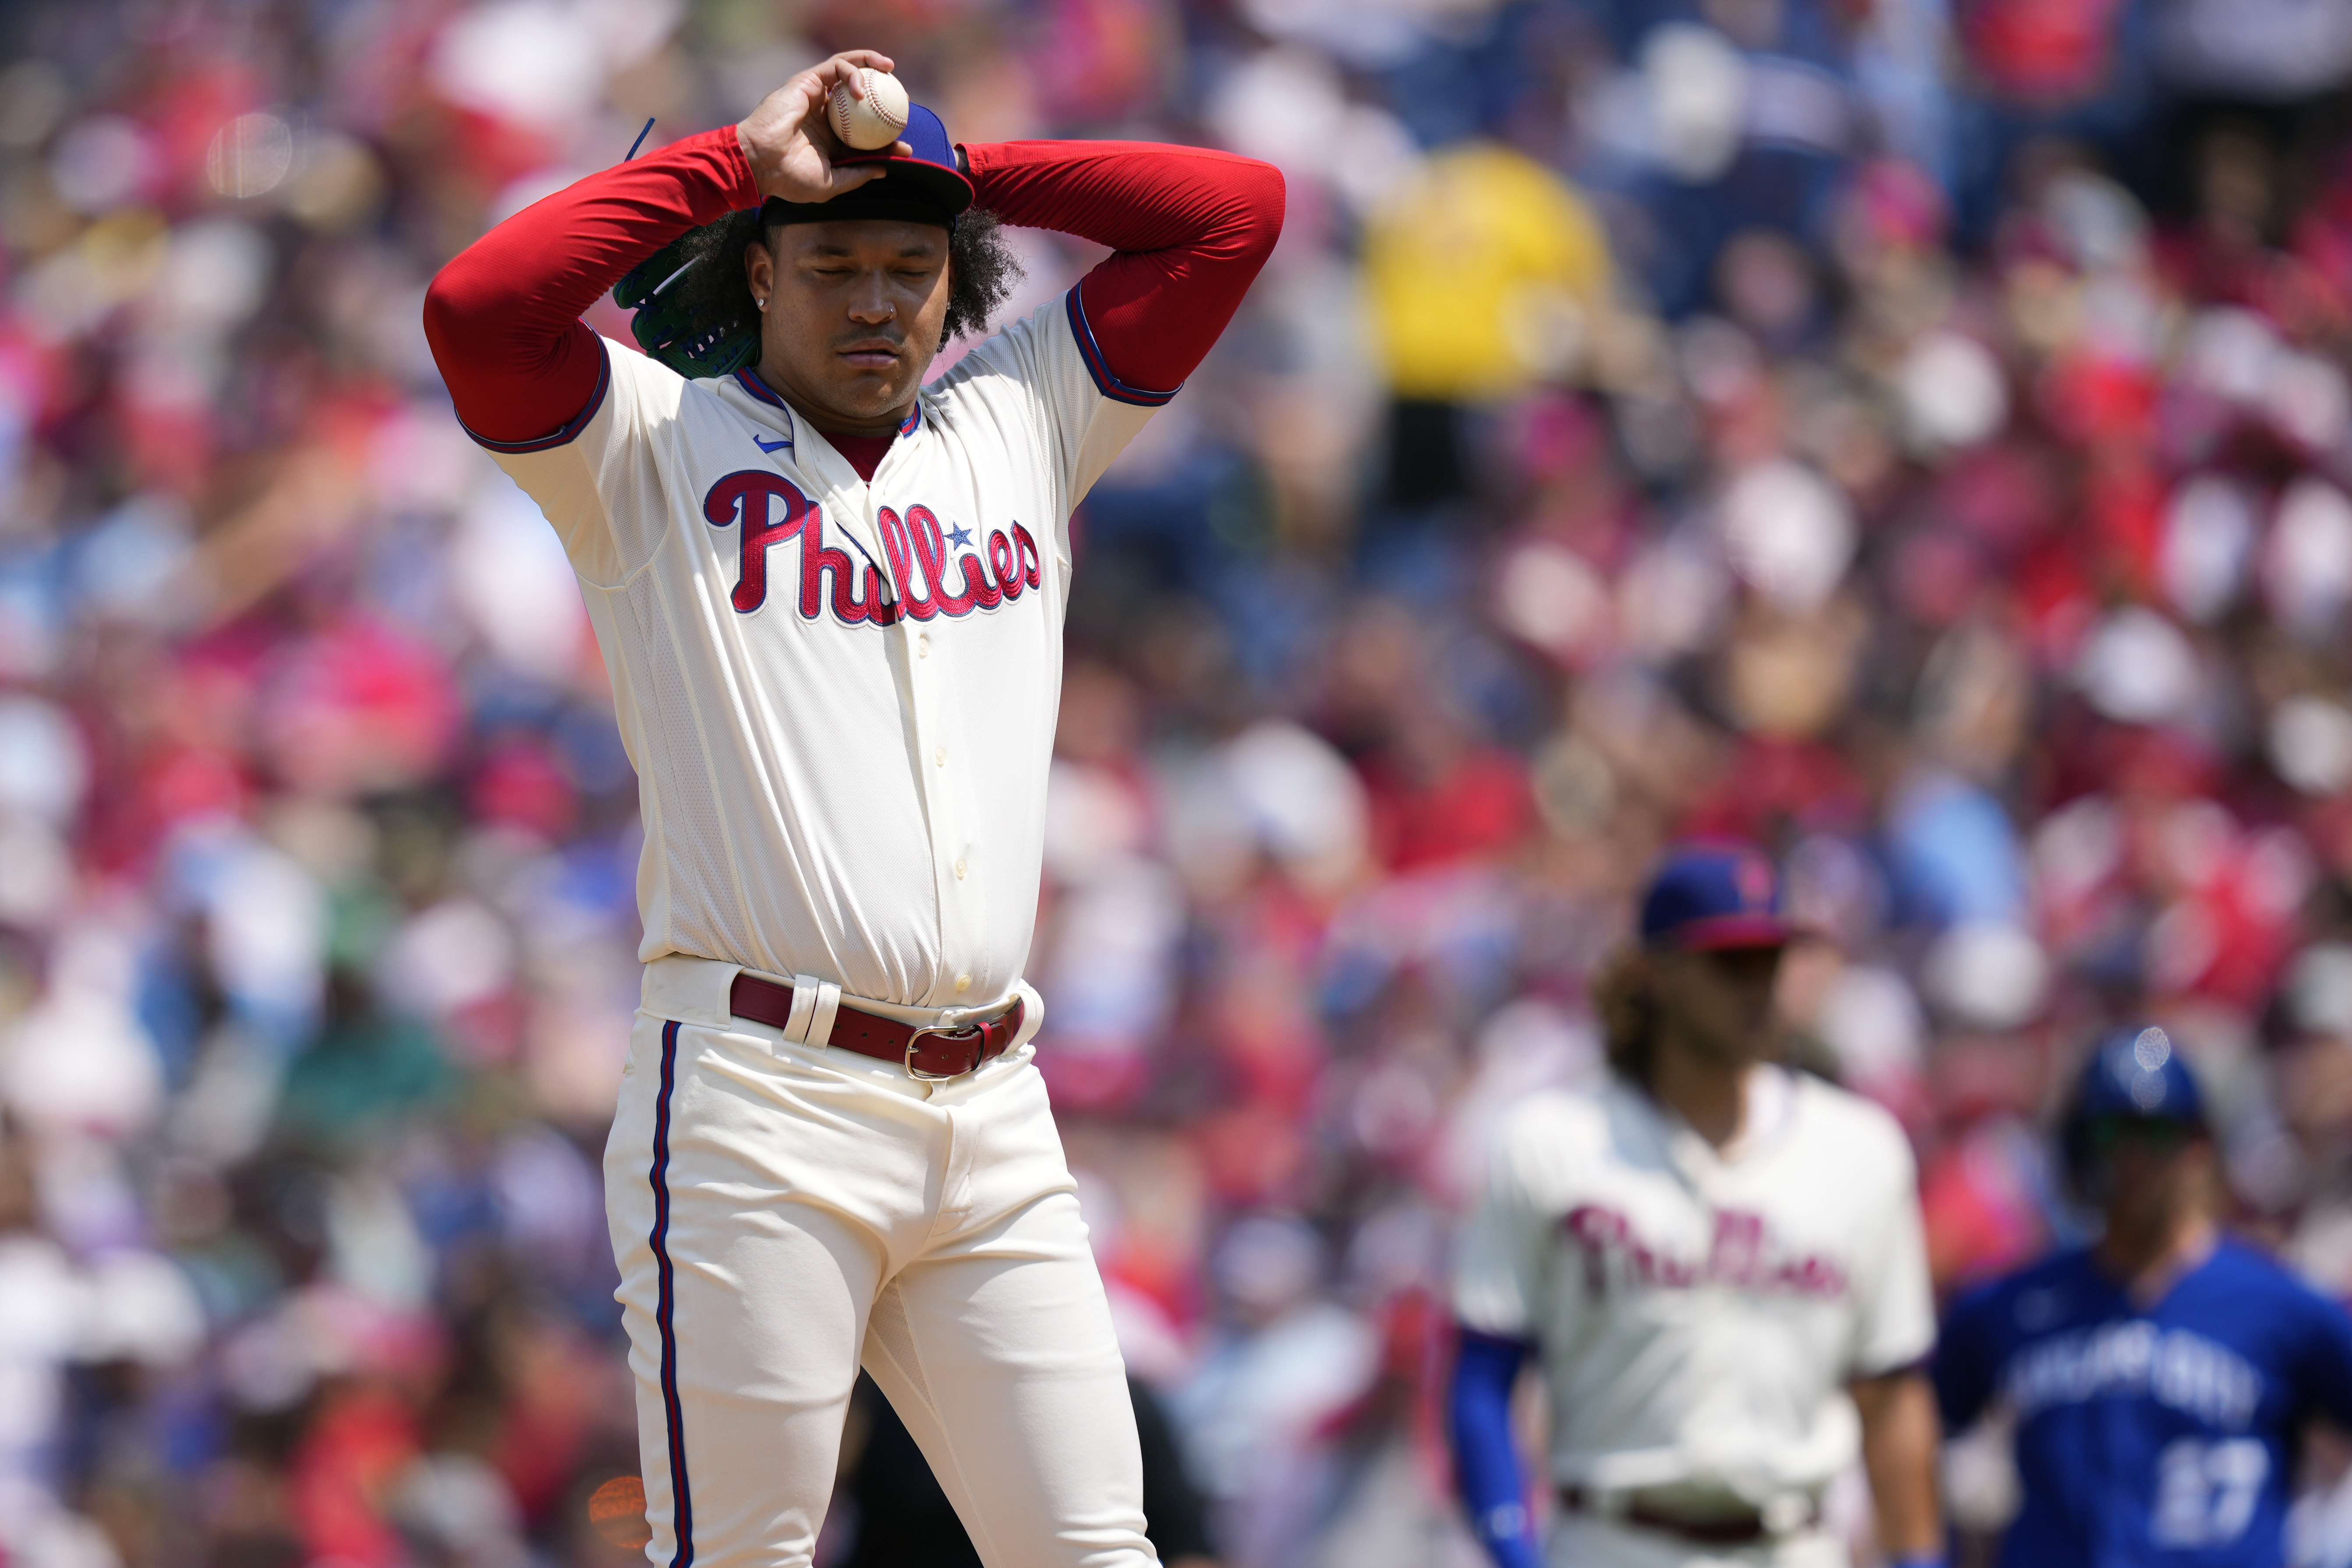 Phillies' pitcher takes over MLB wins lead in victory against Greinke,  Royals 